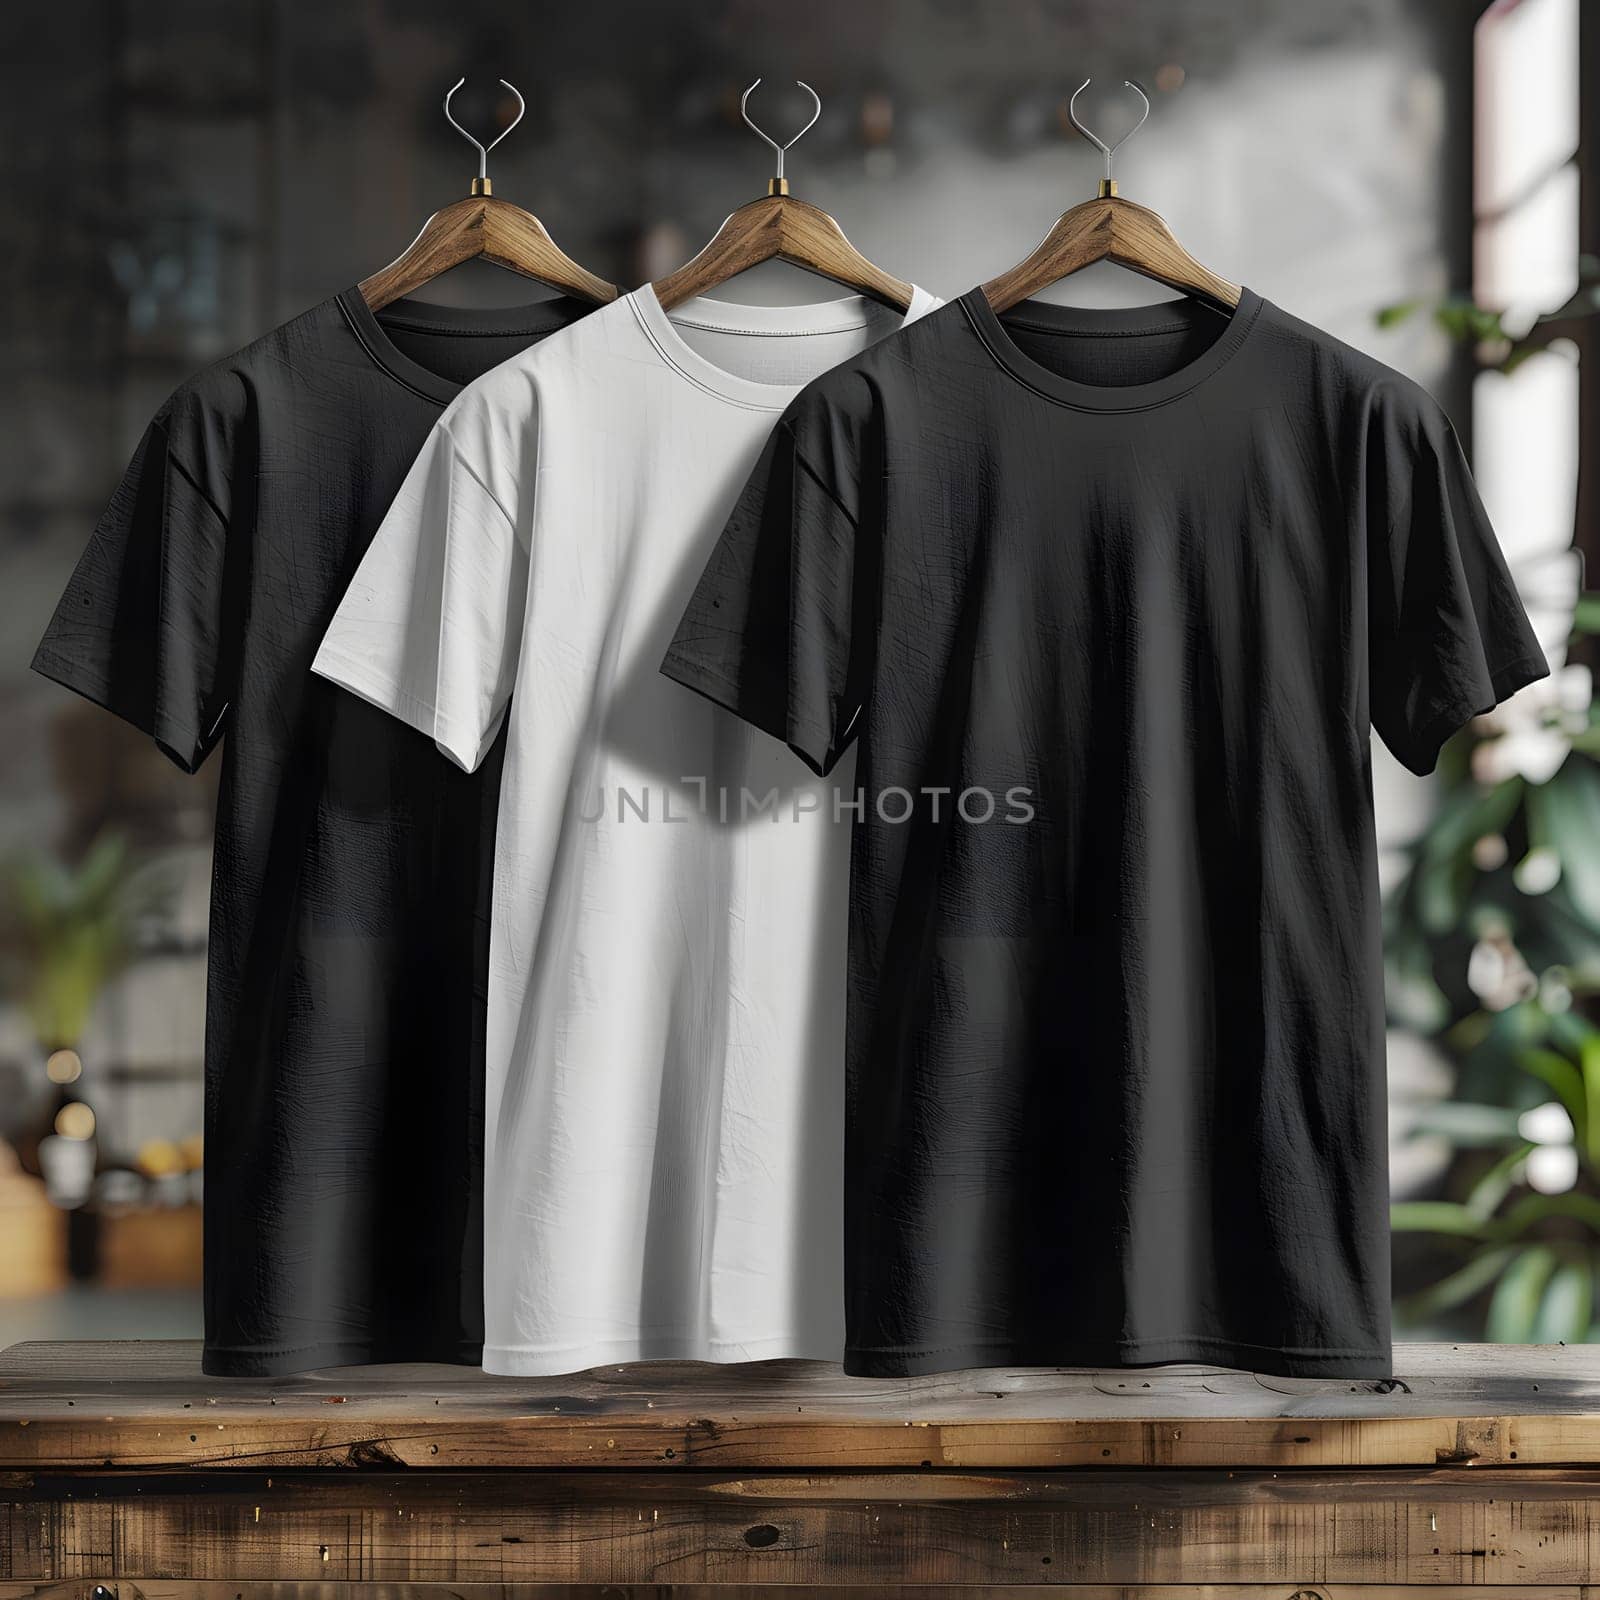 Three tshirts displayed on table, varying in sleeve and design by Nadtochiy